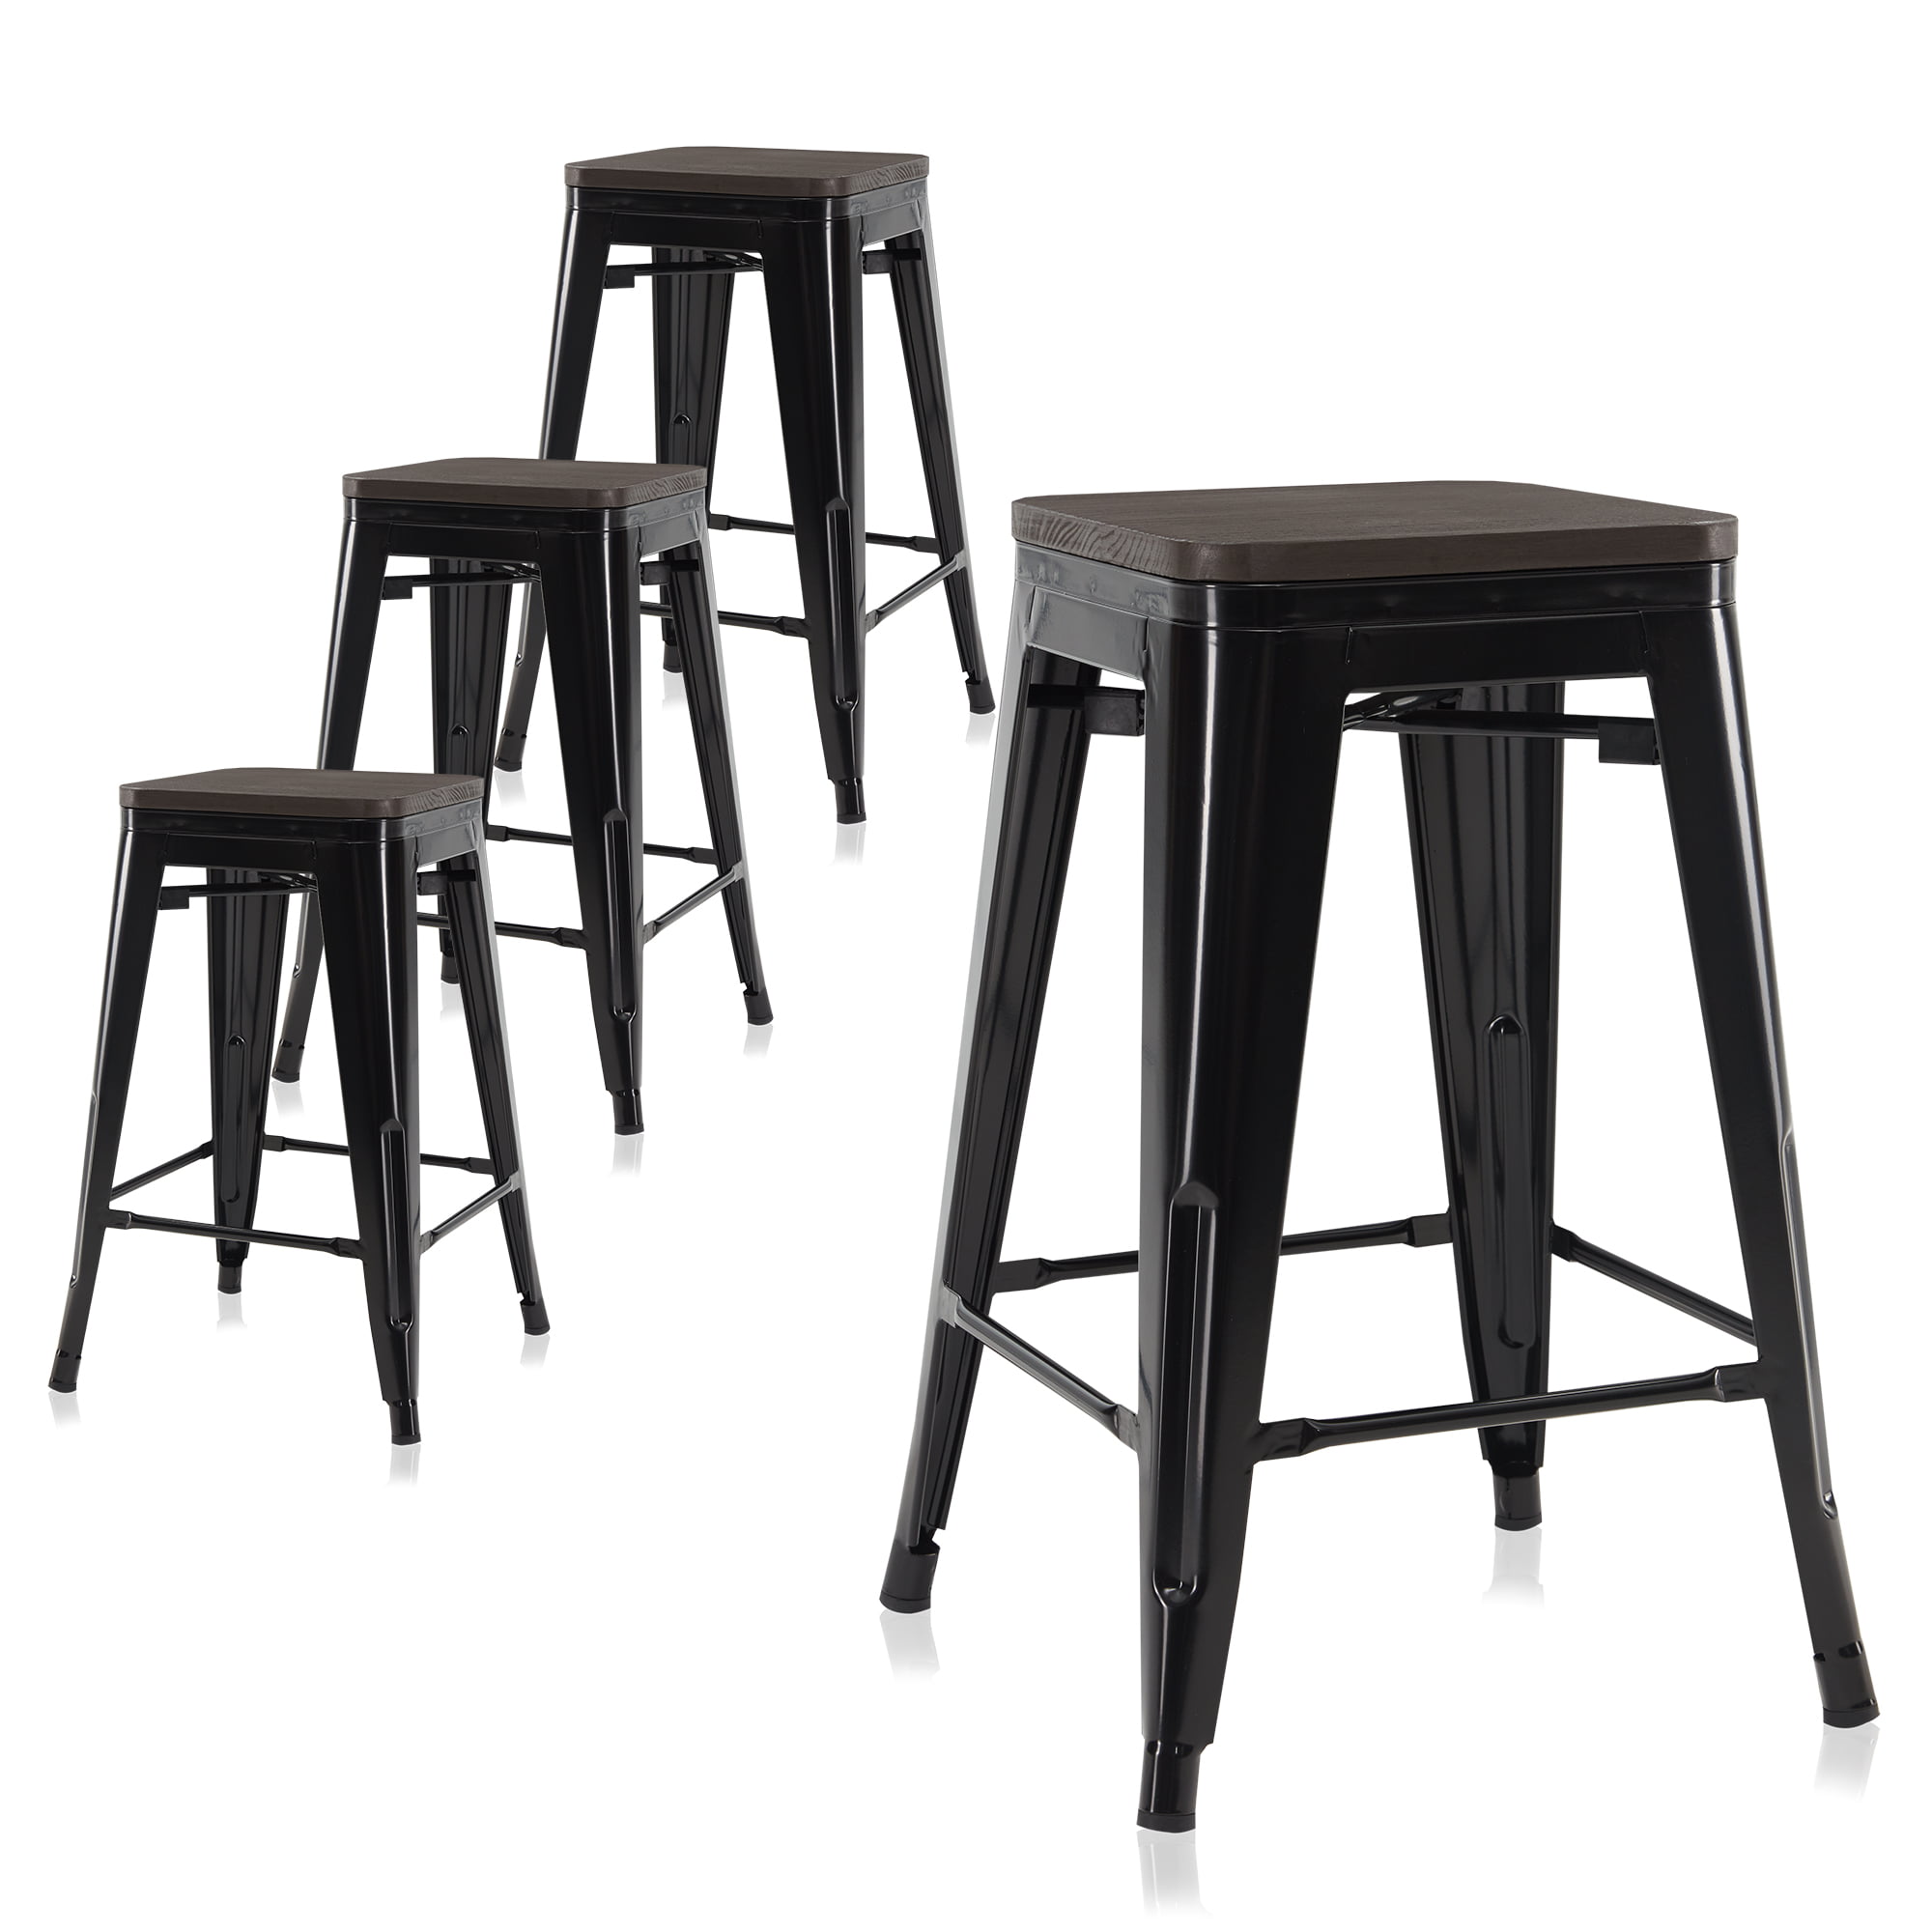 Metal Bar Stools Set of 4 Counter Stools 24 Inch Metal Bar Stools Kitchen Counter Height Barstools Stackable Barstools Indoor Outdoor Patio Bar Set Home Kitchen Dining Chair Black